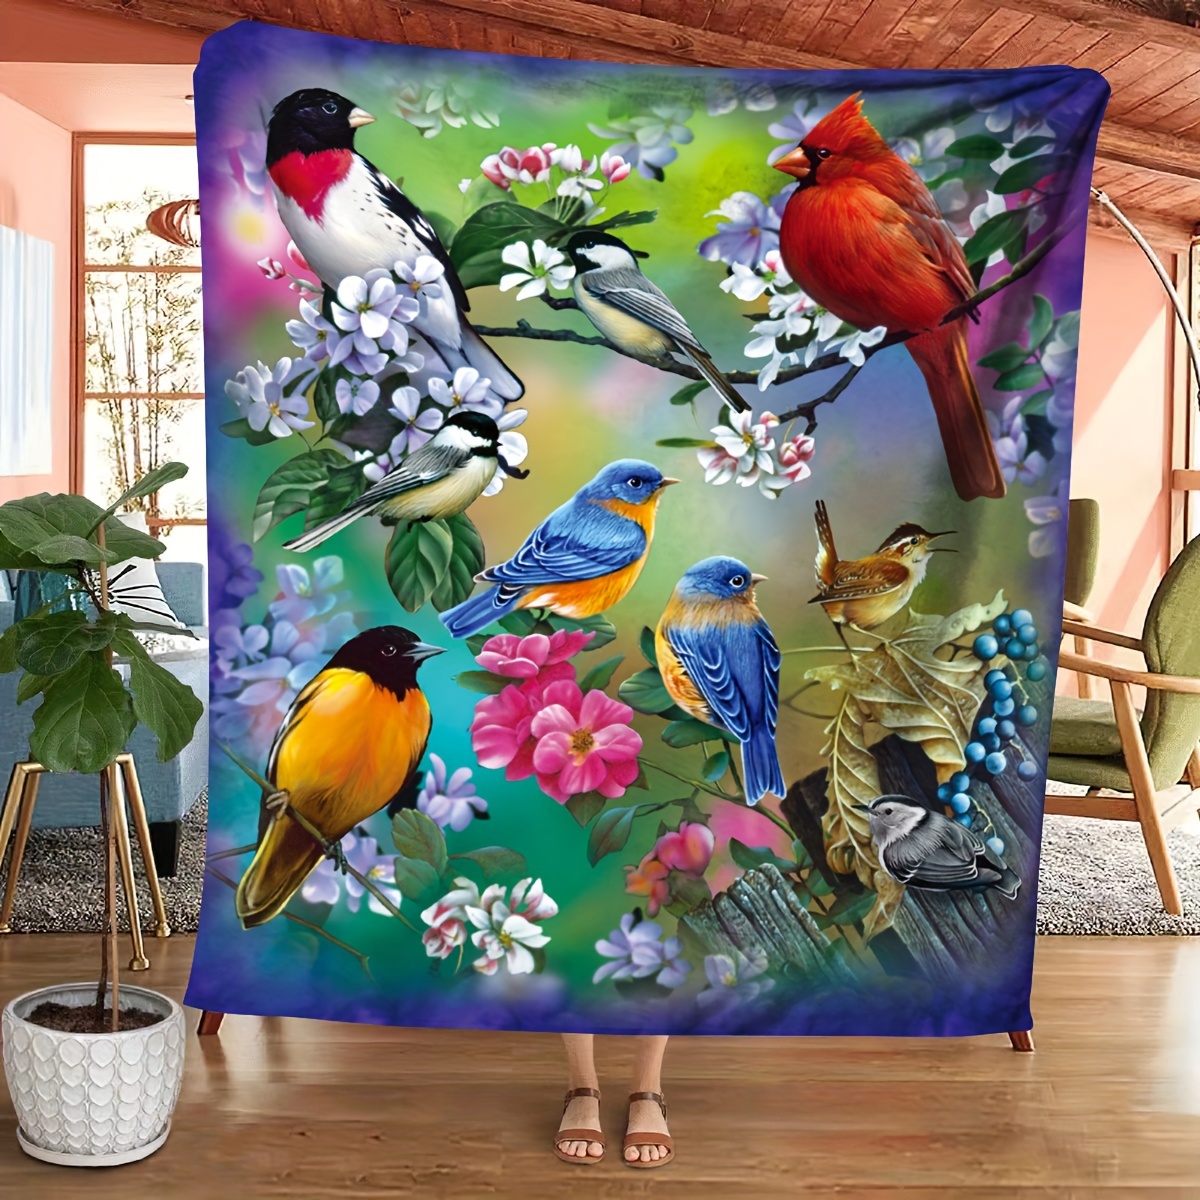 

1pc Colorful Birds On Branches Pattern Blanket Soft Blanket Flannel Blanket For Couch Sofa Office Bed Camping Travel, Multi-purpose Gift Blanket For All Season